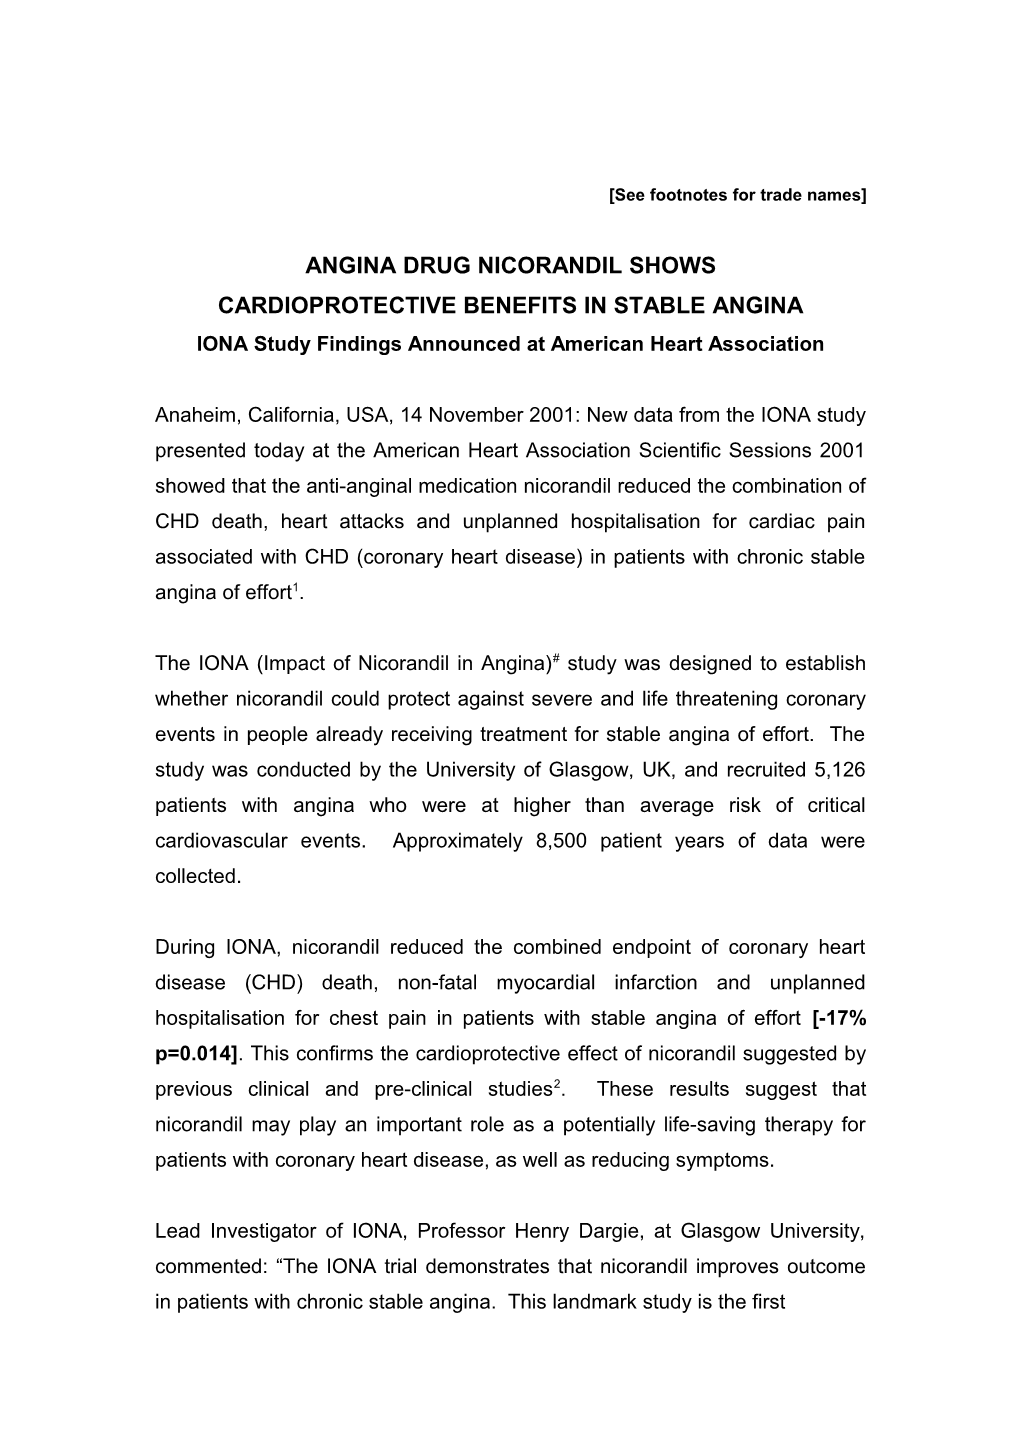 IONA Study Results Shows Cardioprotective Qualities of Nicorandil